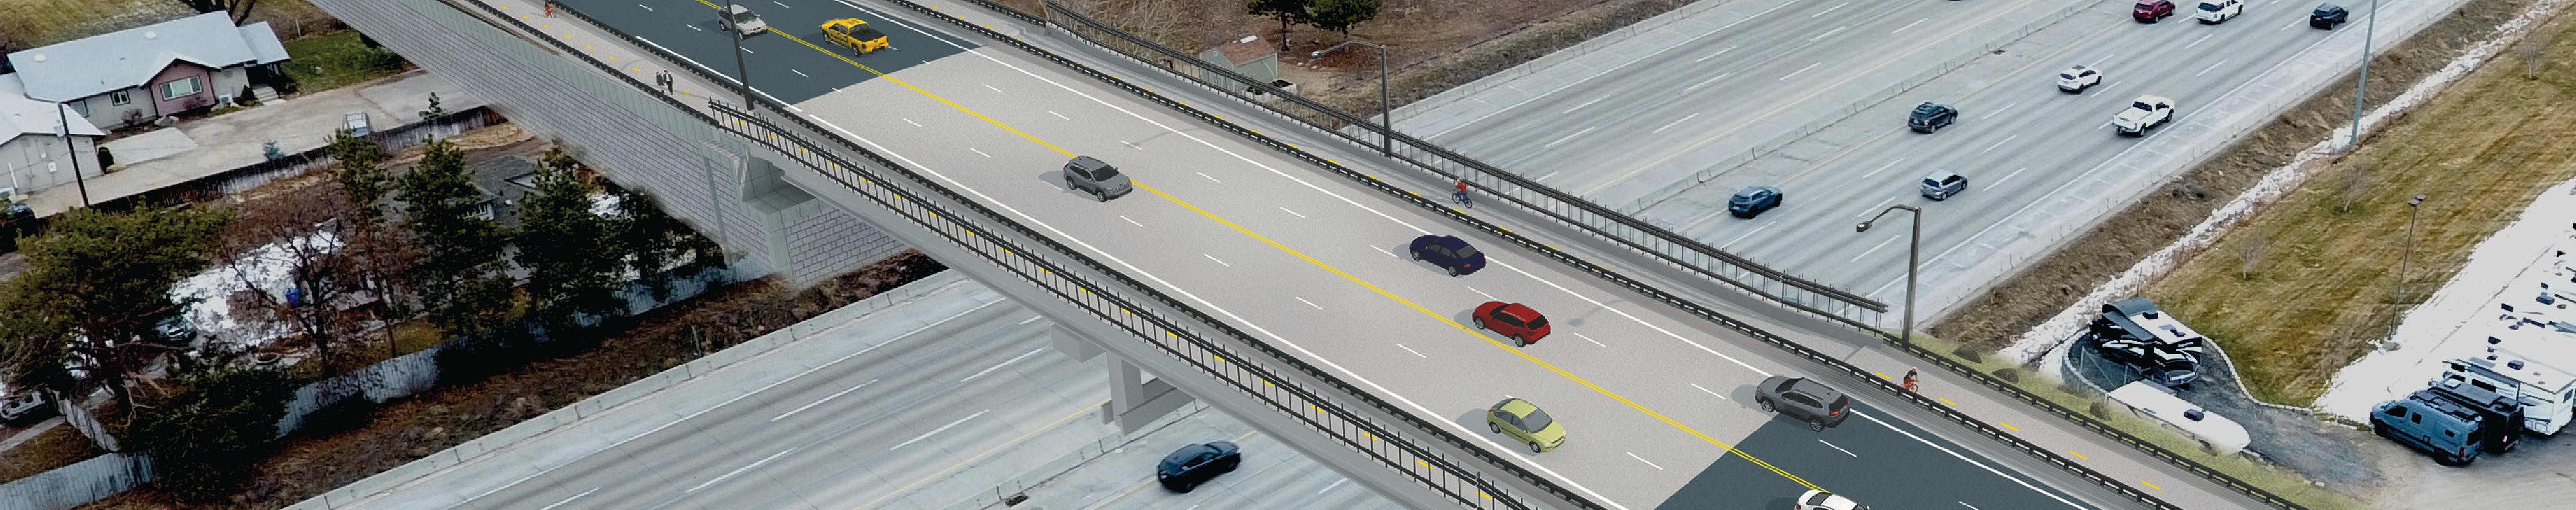 Rendering of proposed Linder Road Overpass, Franklin to Overland Road.